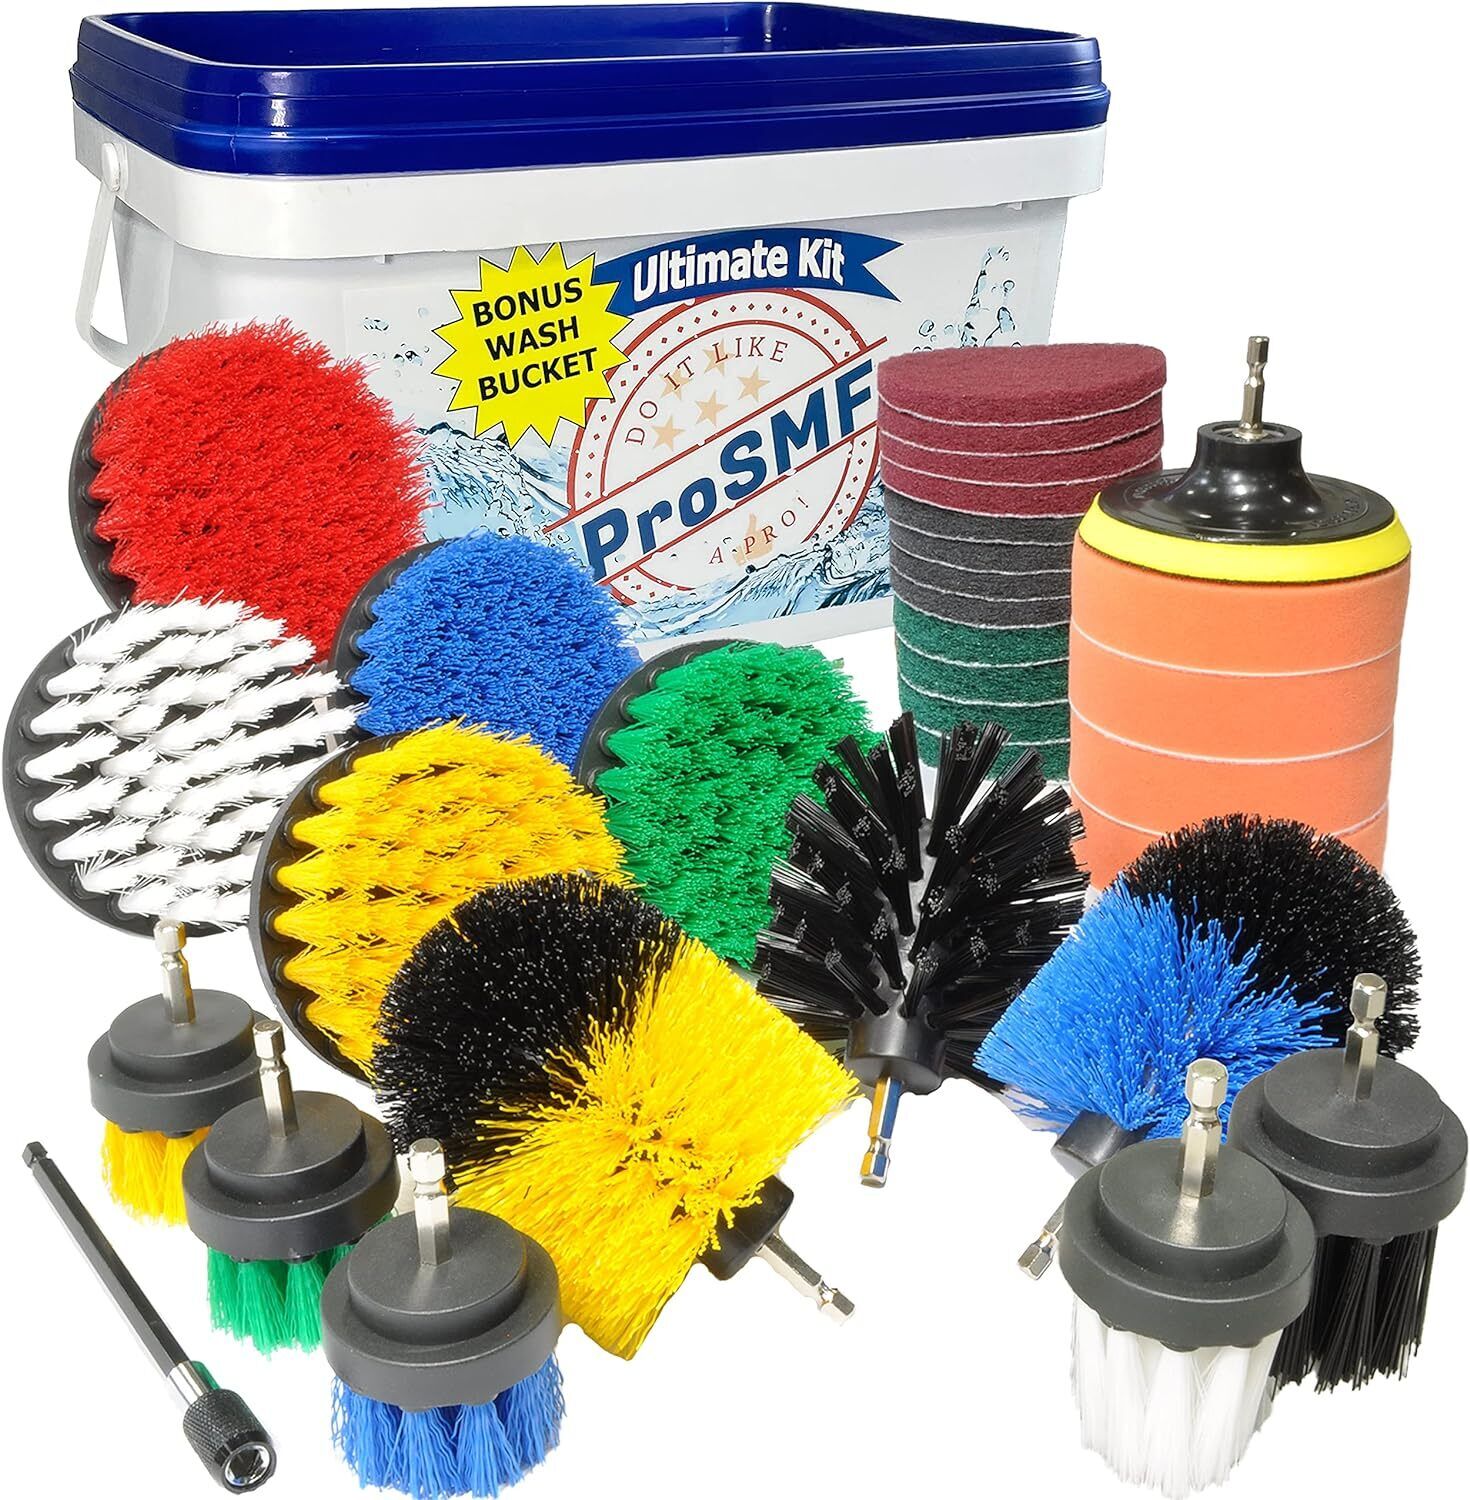 Drill Brush Attachment Set - The Ultimate All-Purpose Cleaning Kit